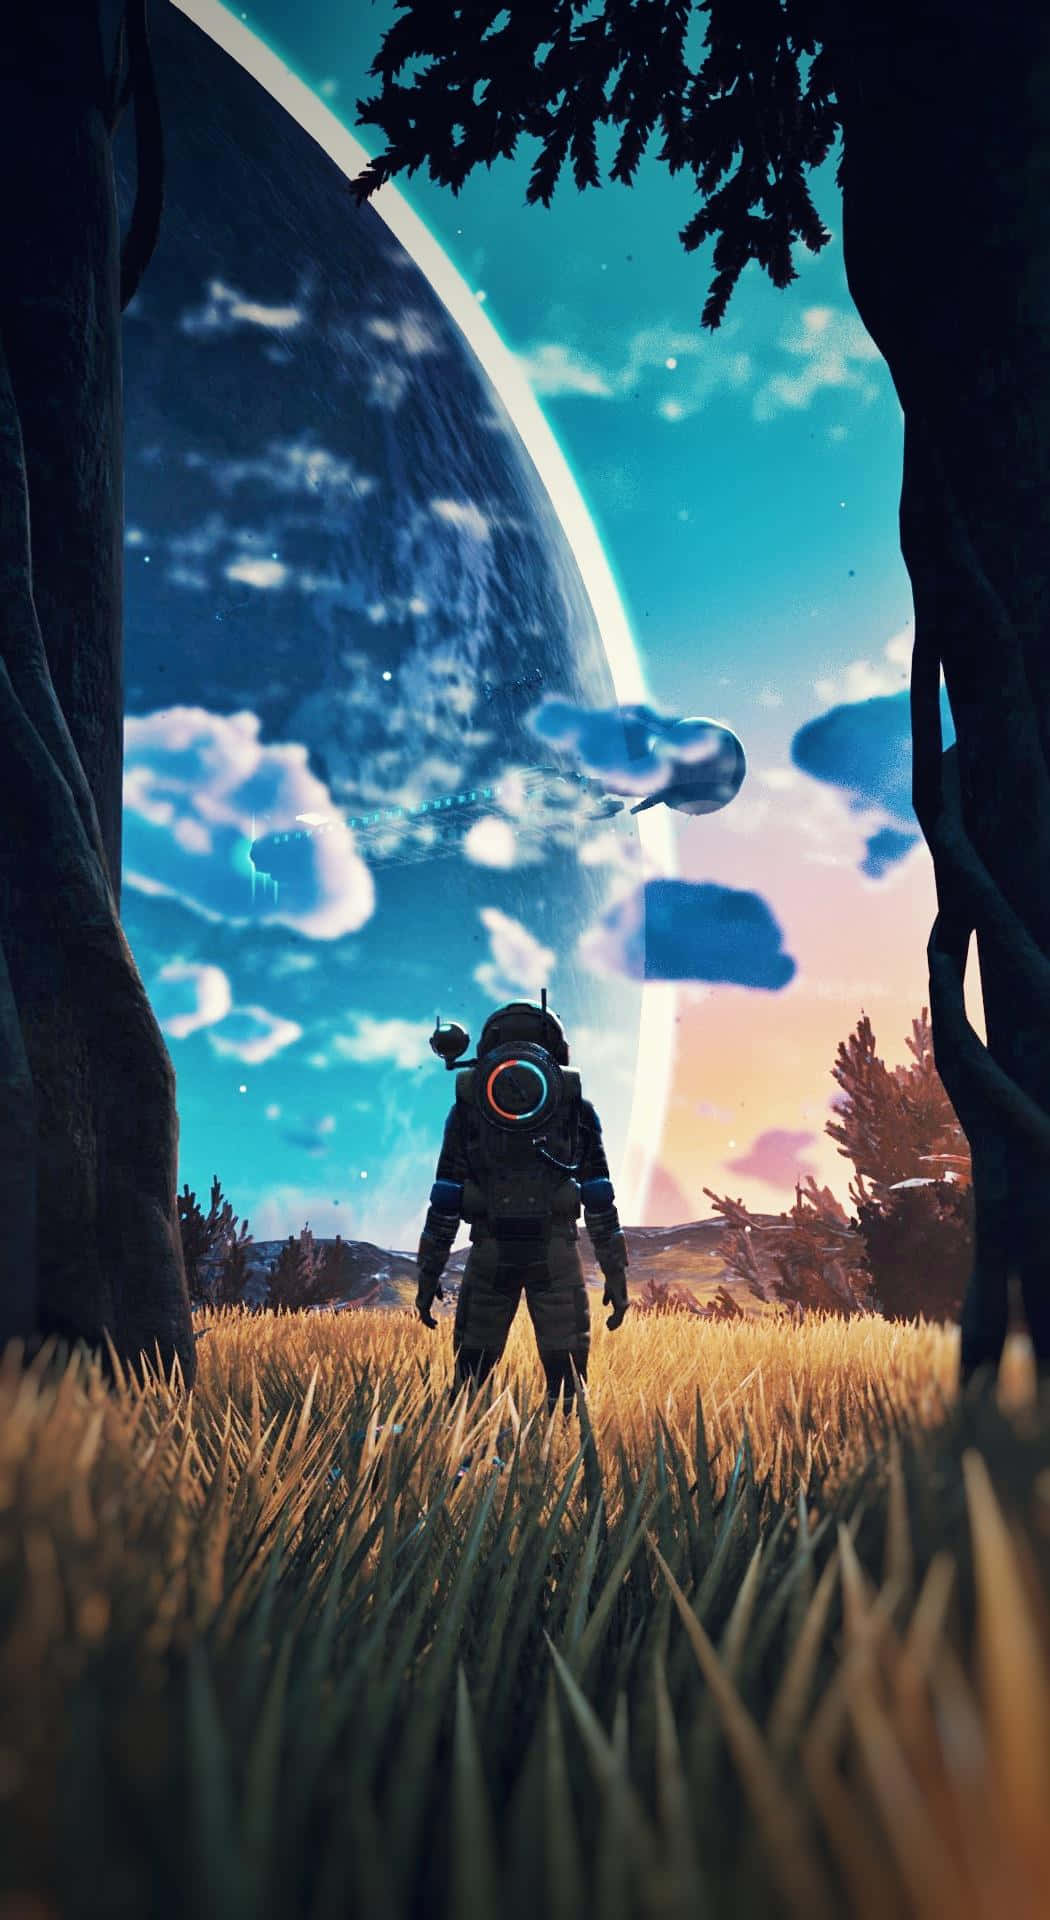 Choose the path less traveled in No Man's Sky Wallpaper